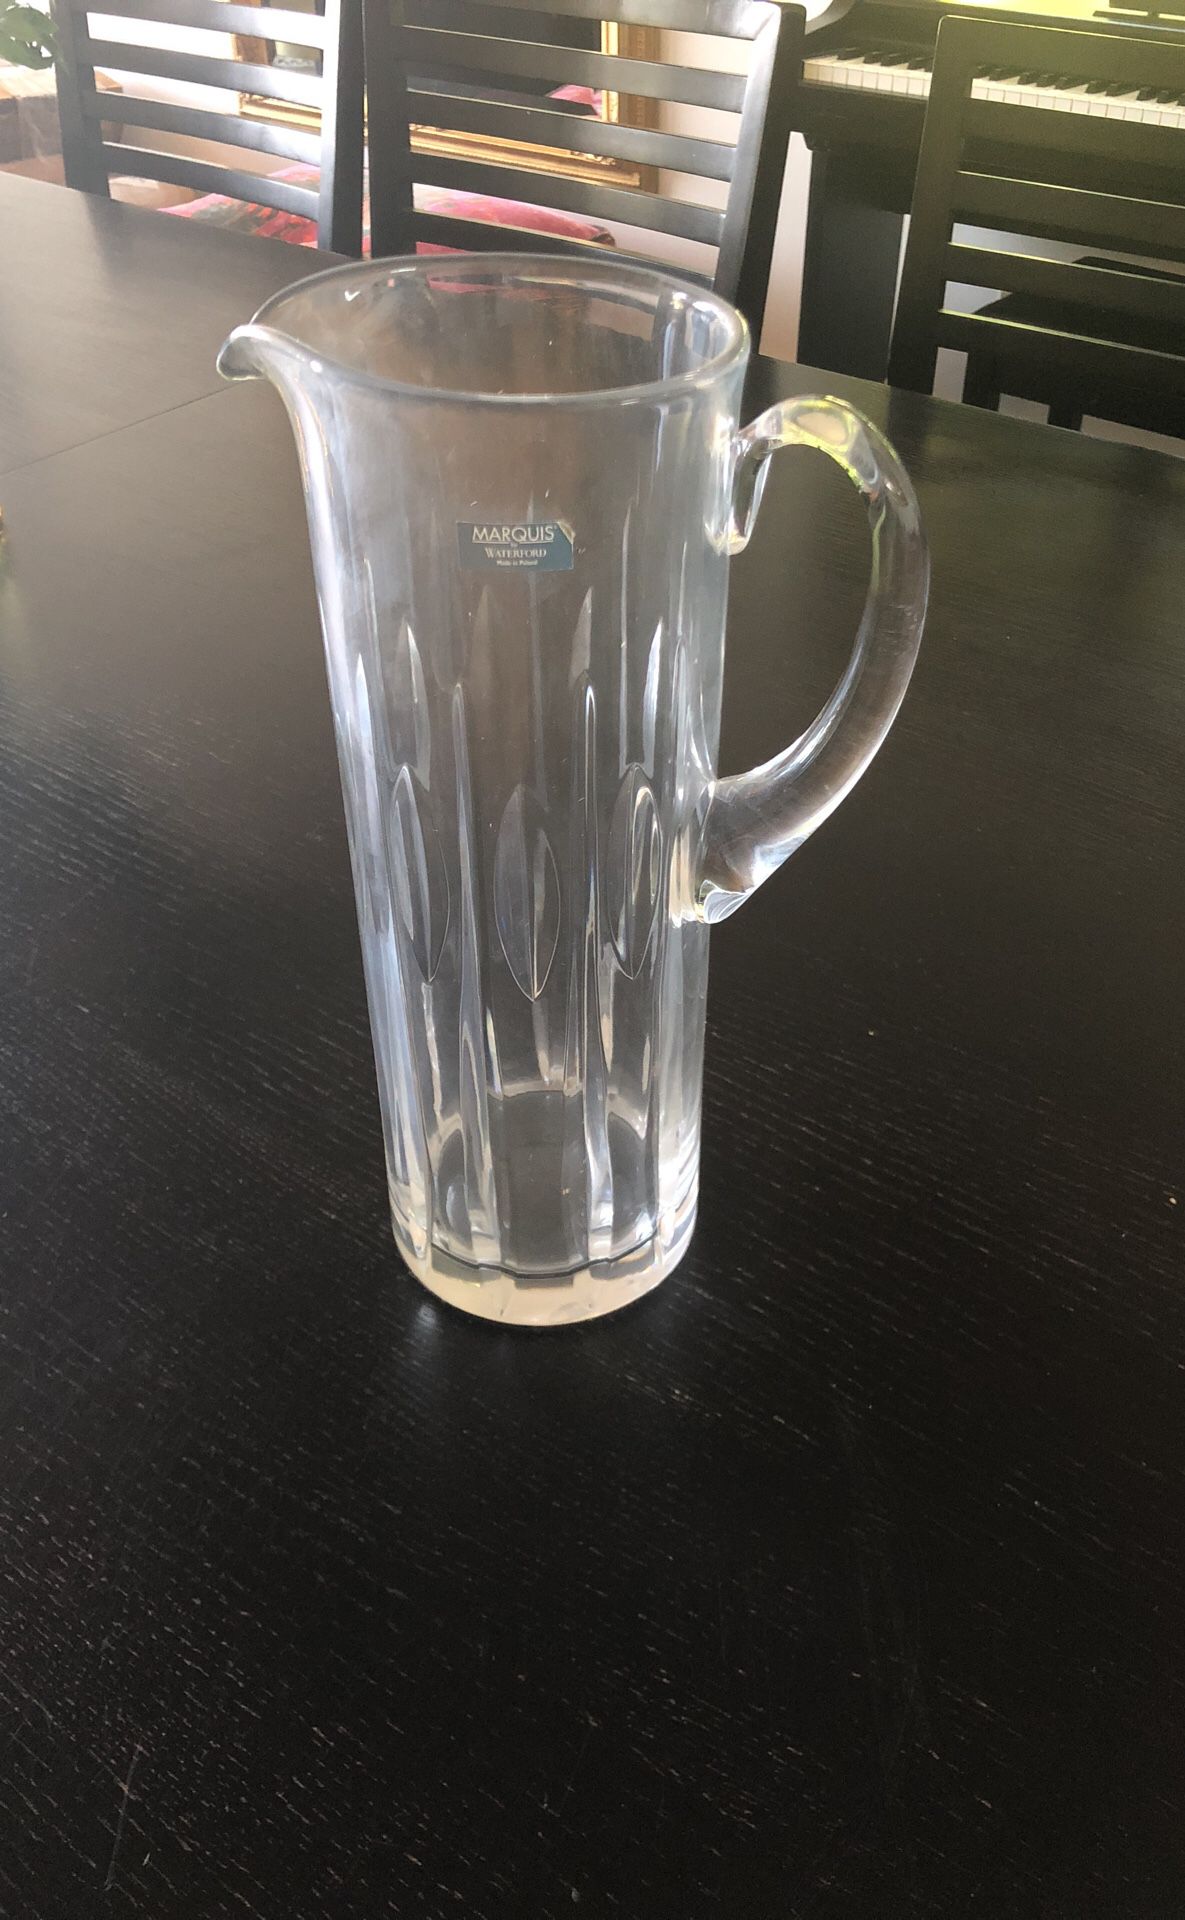 Marquis Waterford Crystal Pitcher- Large